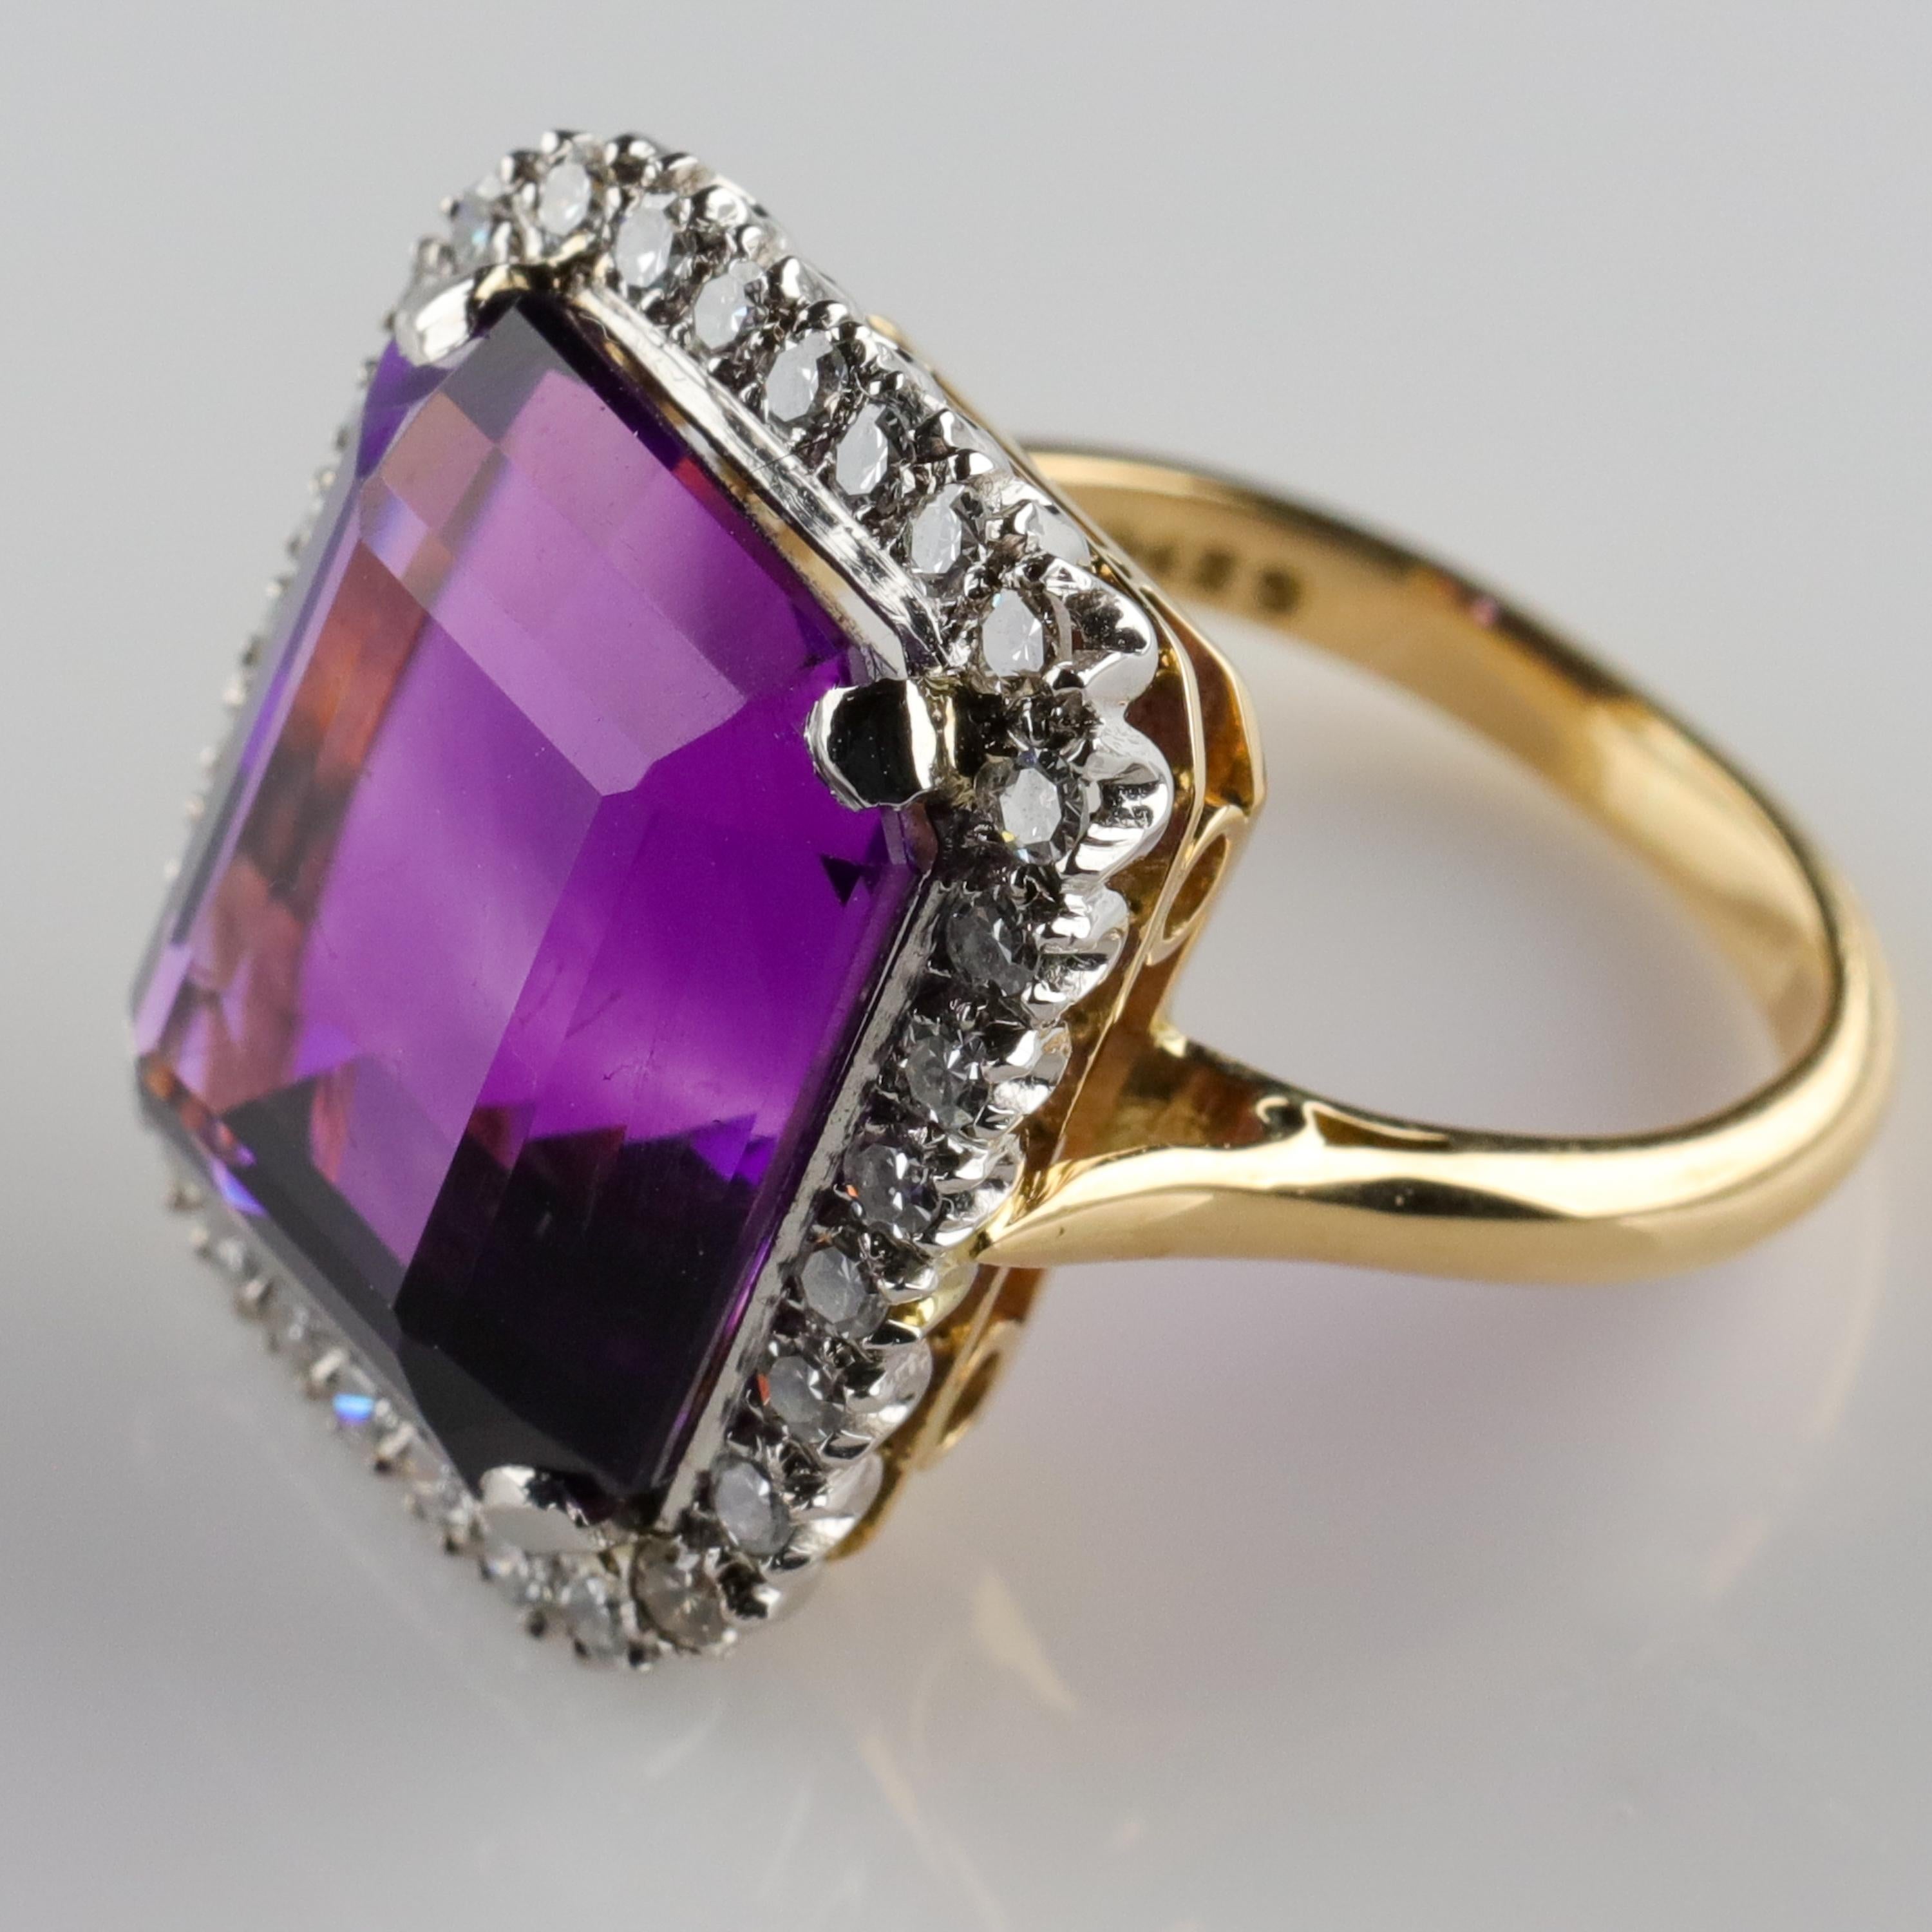 Amethyst Ring by British Royal Jeweler in Original Box with Receipt 2